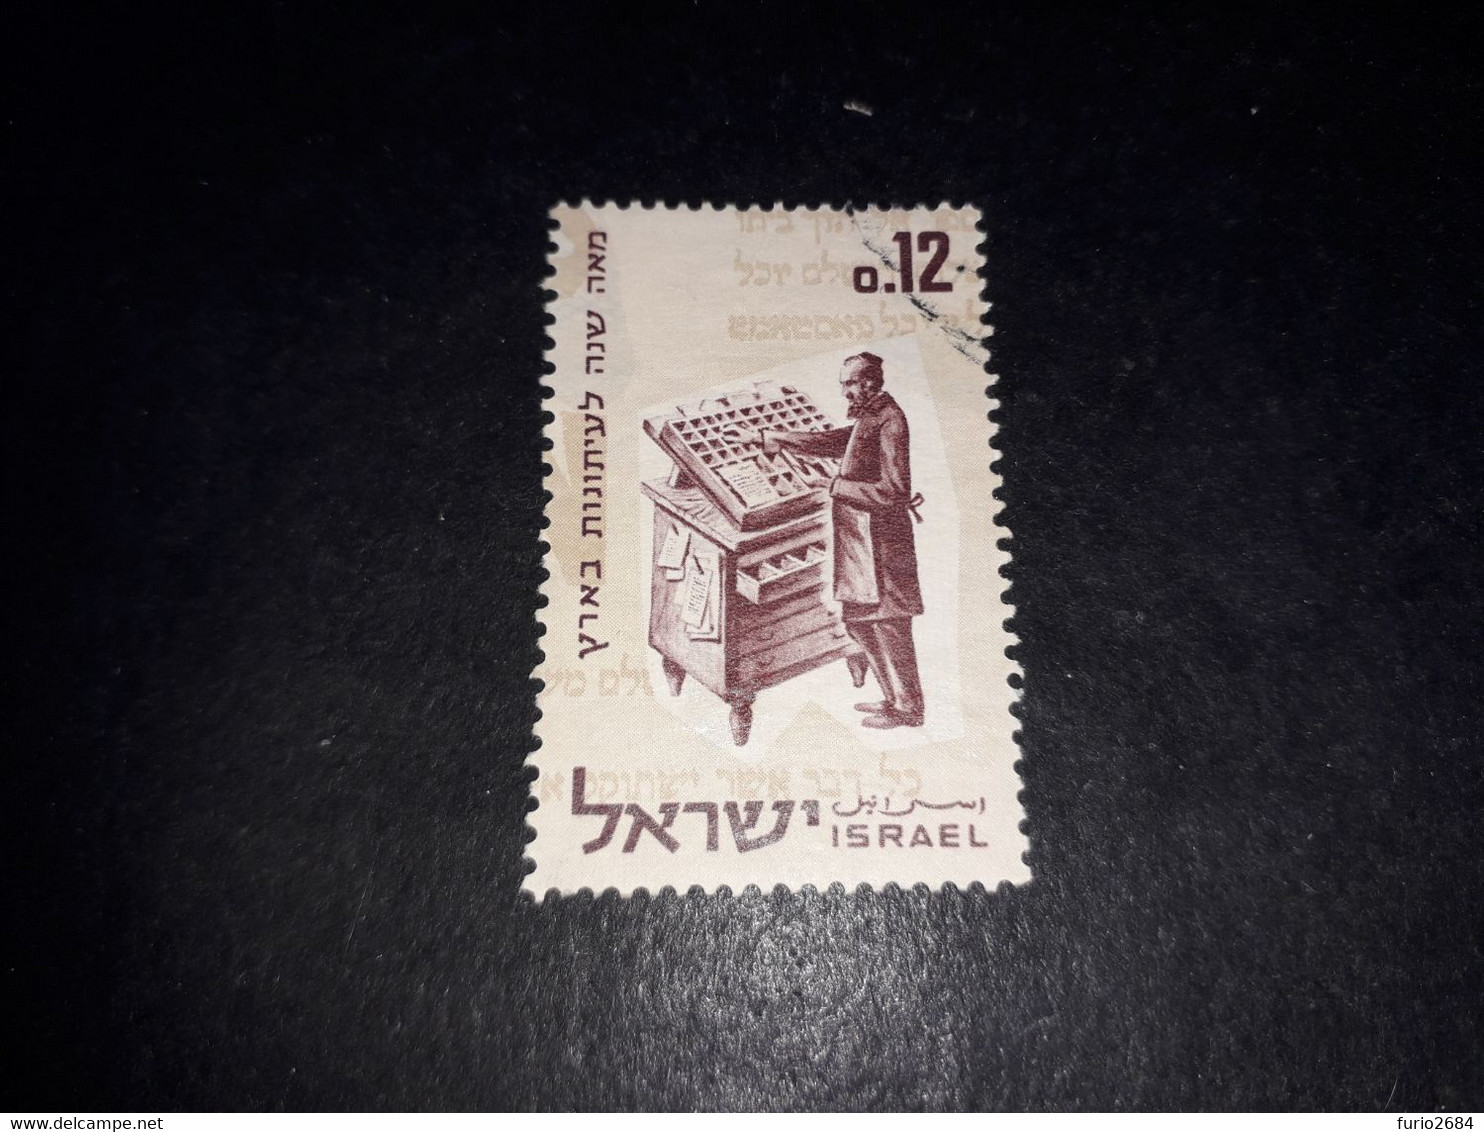 06AL02 ISRAELE 1 VALORE "O" - Used Stamps (without Tabs)